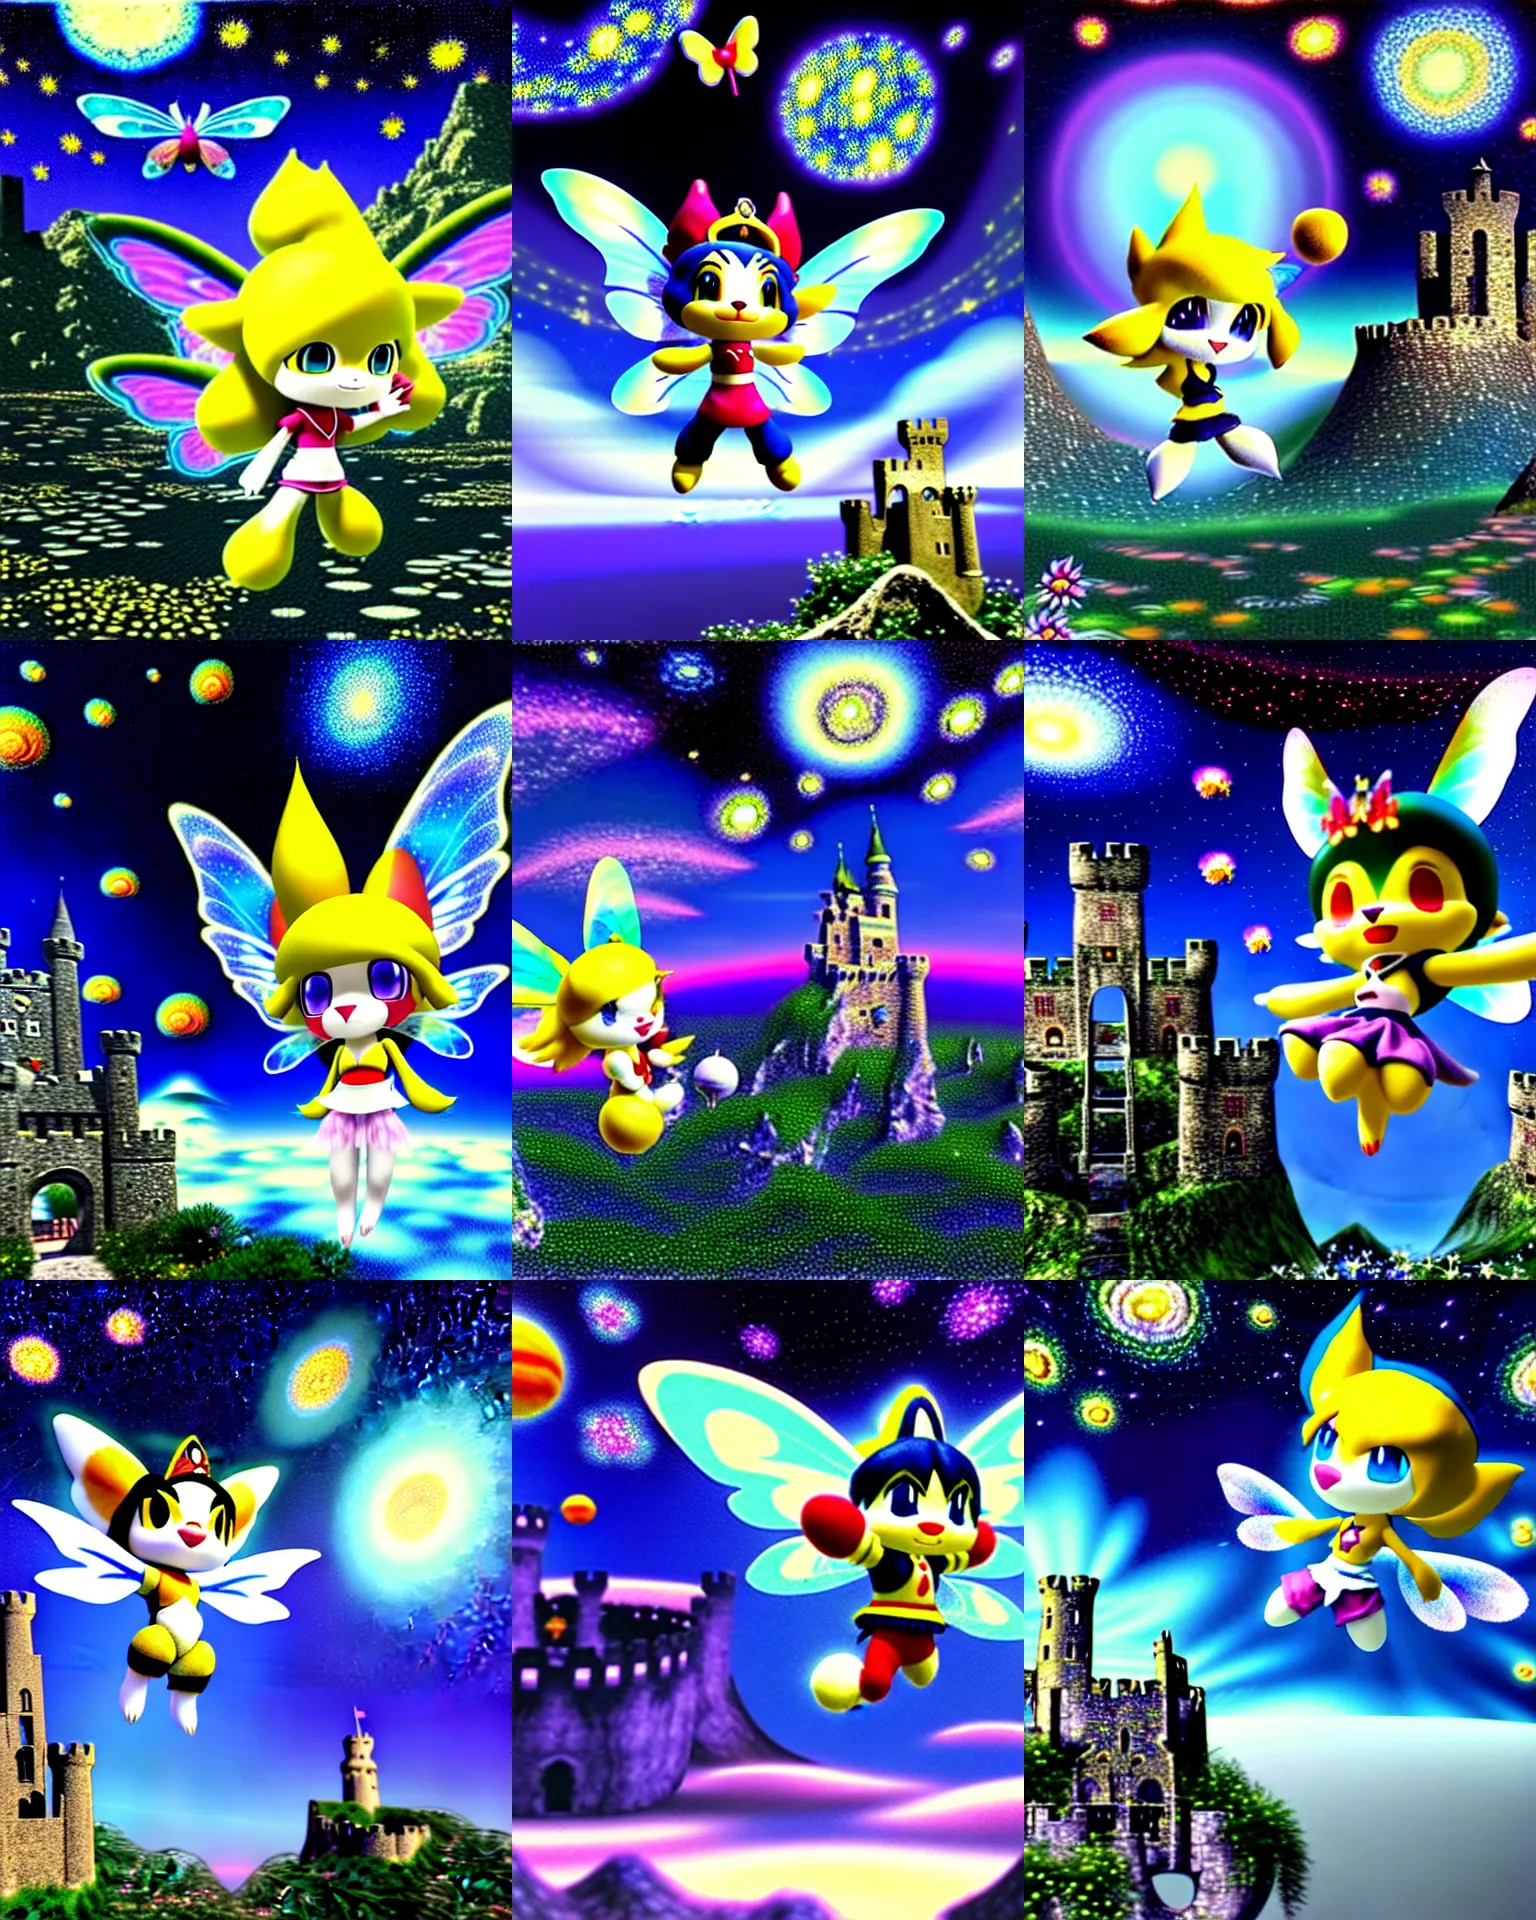 Prompt: 3 d render of chibi fairy klonoa flying in a starry night sky in cybernetic mountain landscape with castle ruins against a psychedelic surreal background with 3 d butterflies and 3 d flowers n the style of 1 9 9 0's cg graphics, lsd dream emulator psx, 3 d rendered y 2 k aesthetic by ichiro tanida, 3 do magazine, wide shot